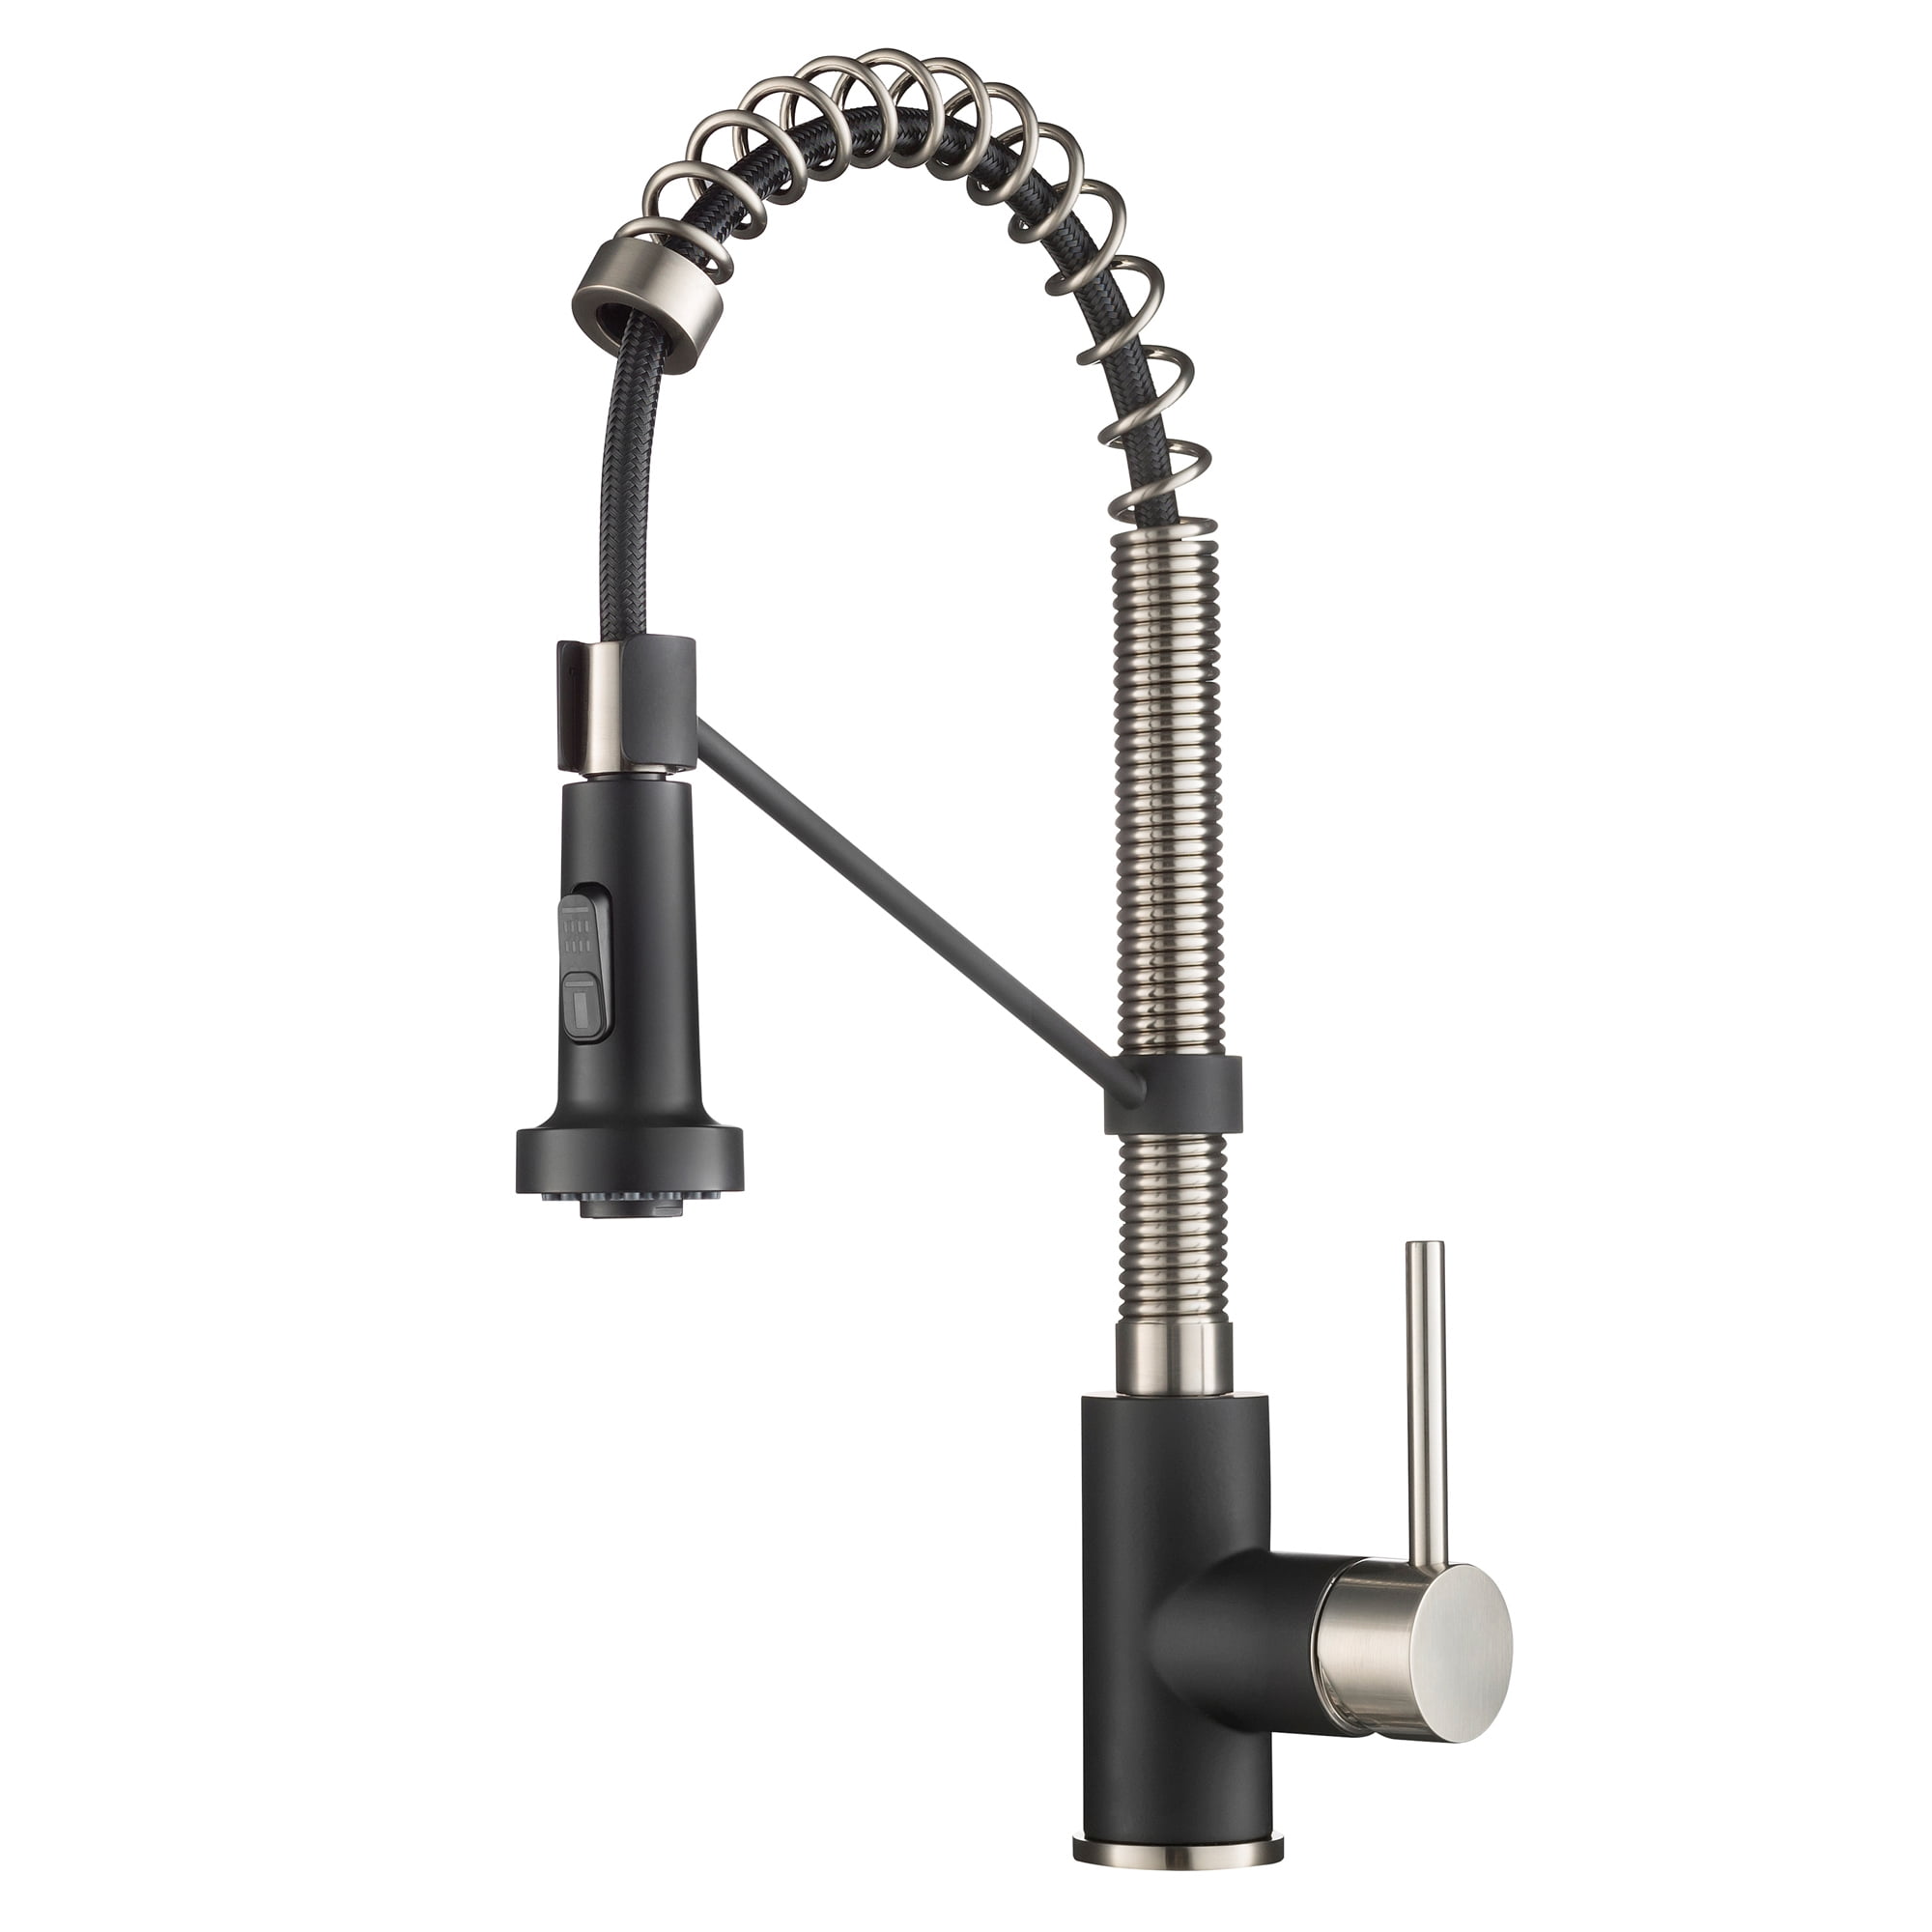 Kraus Spot Free Bolden 18-Inch Commercial Kitchen Faucet with Dual Function Pull-Down Sprayhead In All-Brite Stainless Steel/Matte Black Finish